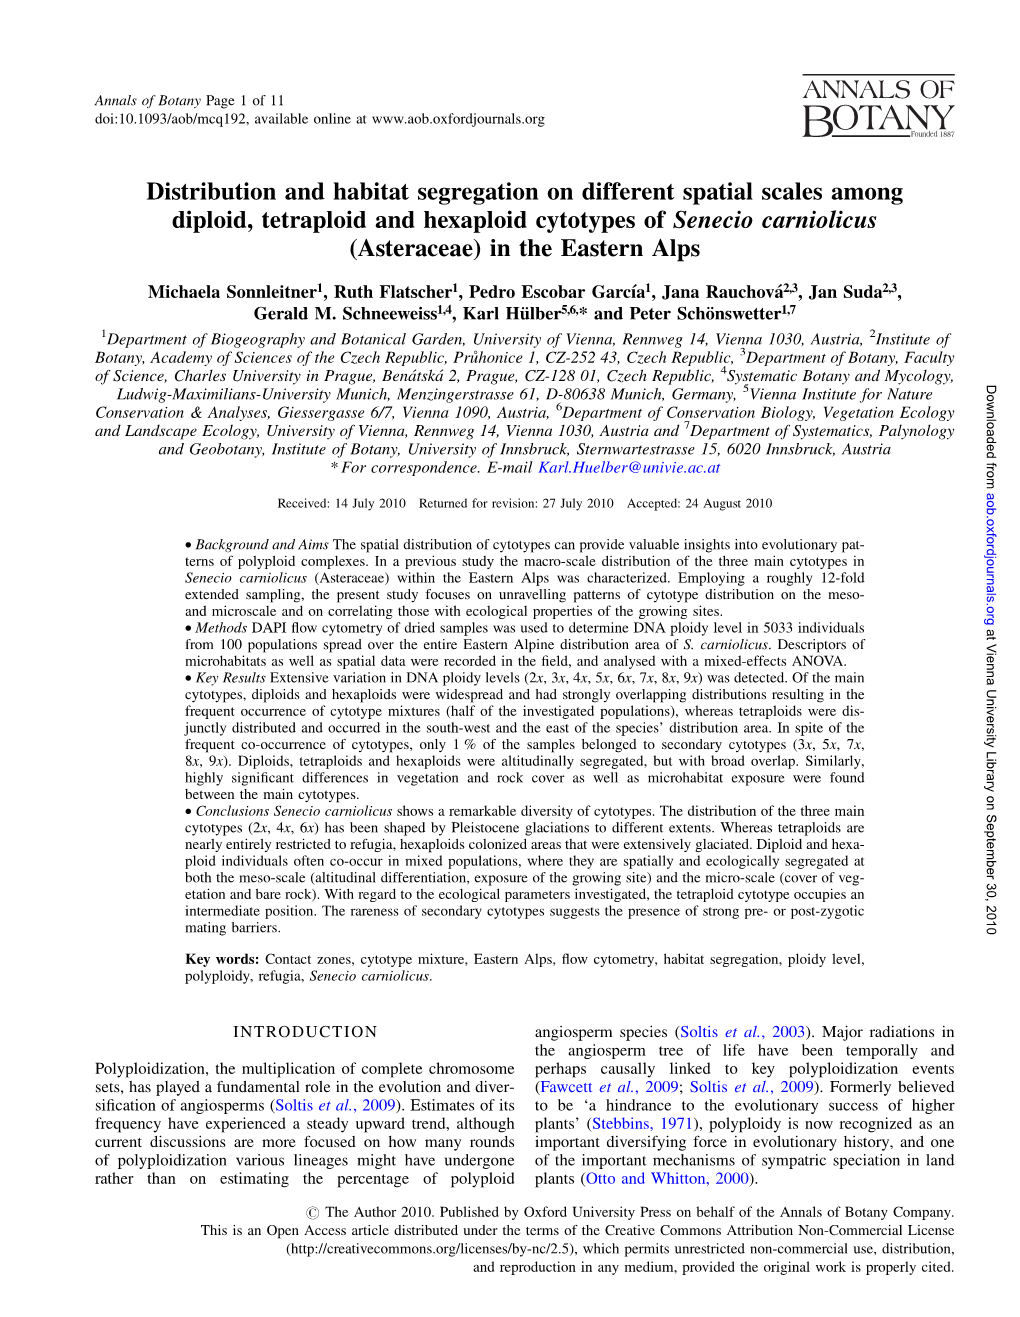 Distribution and Habitat Segregation on Different Spatial Scales Among